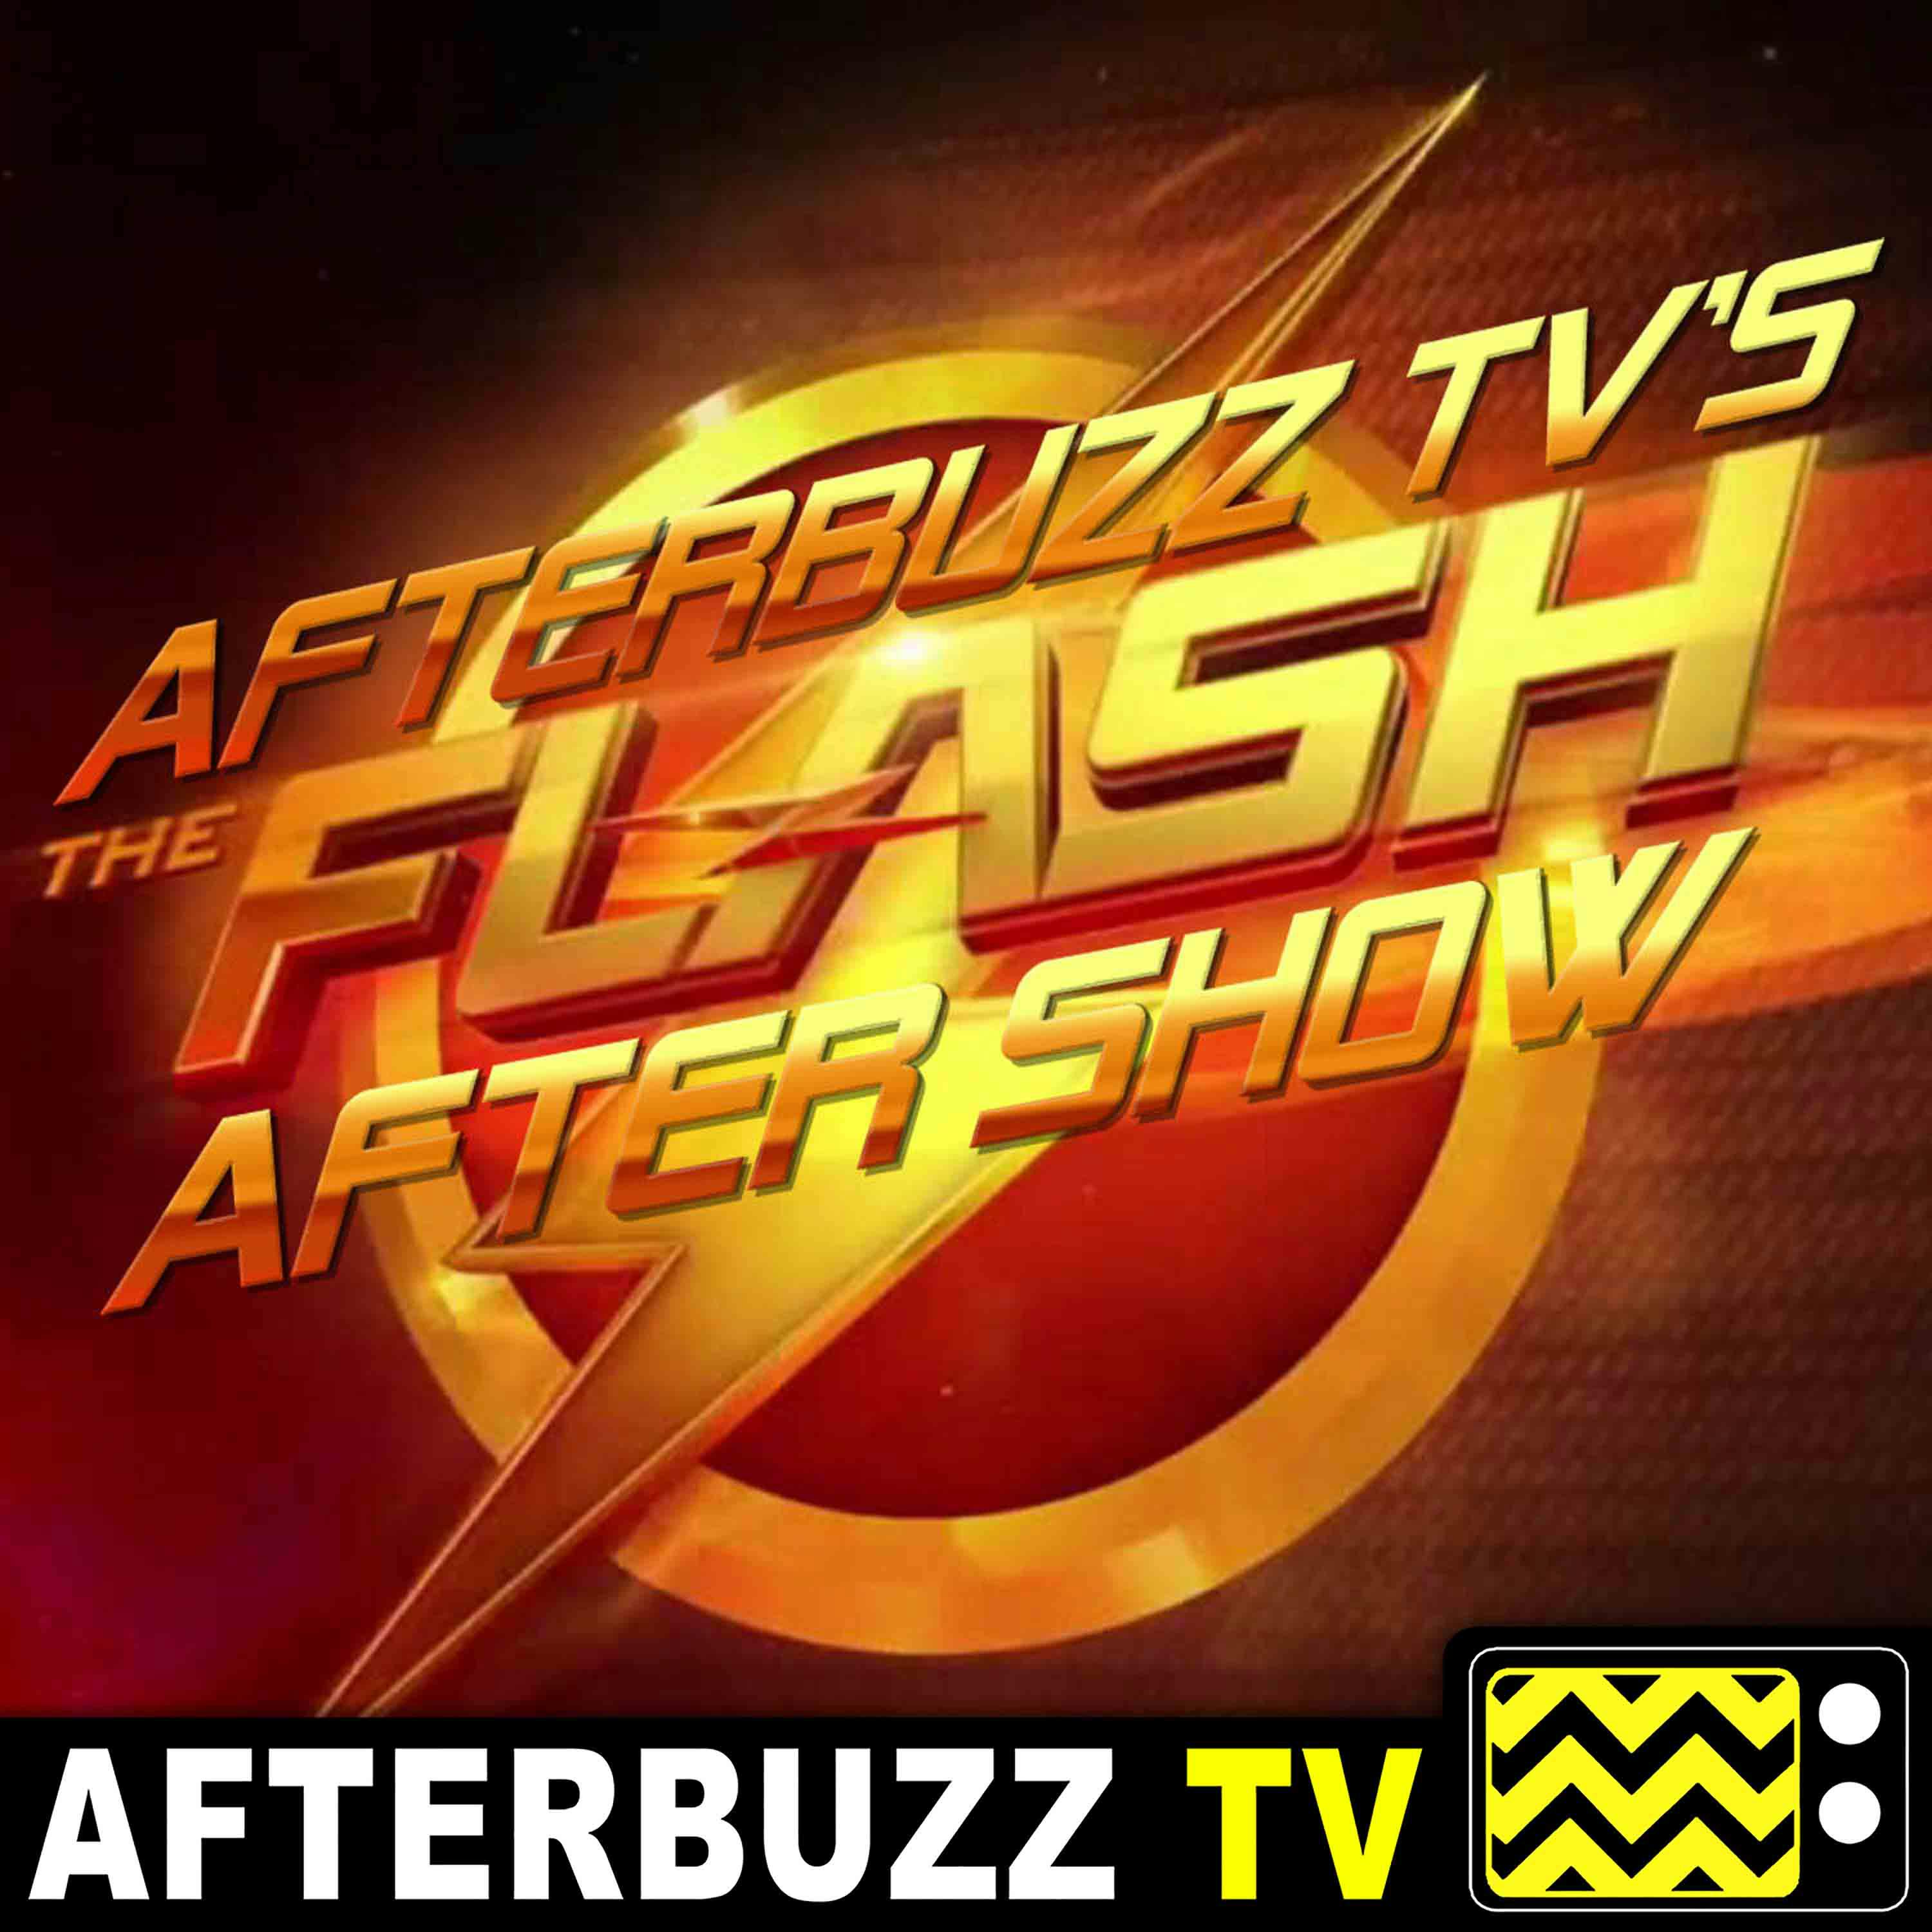 ”A Flash of the Lightning” Season 6 Episode 2 ’The Flash’ Review